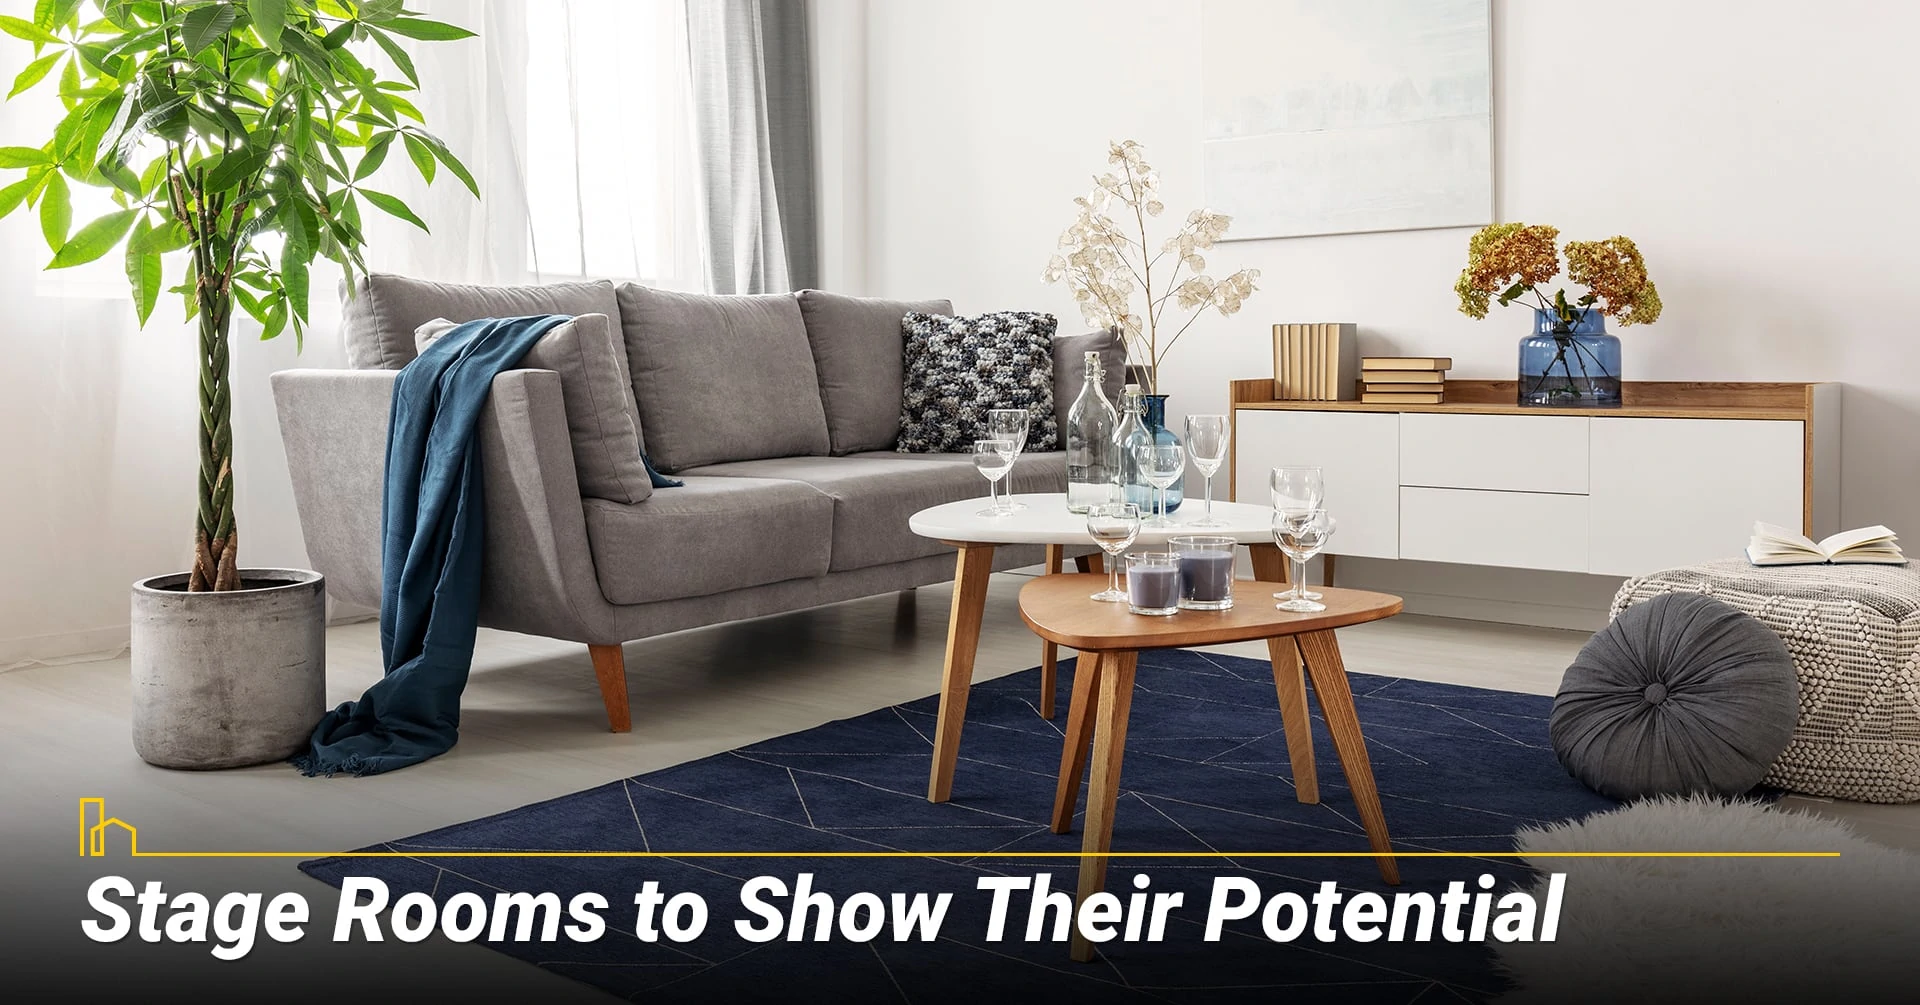 Stage Rooms to Show Their Potential, make your space more welcoming